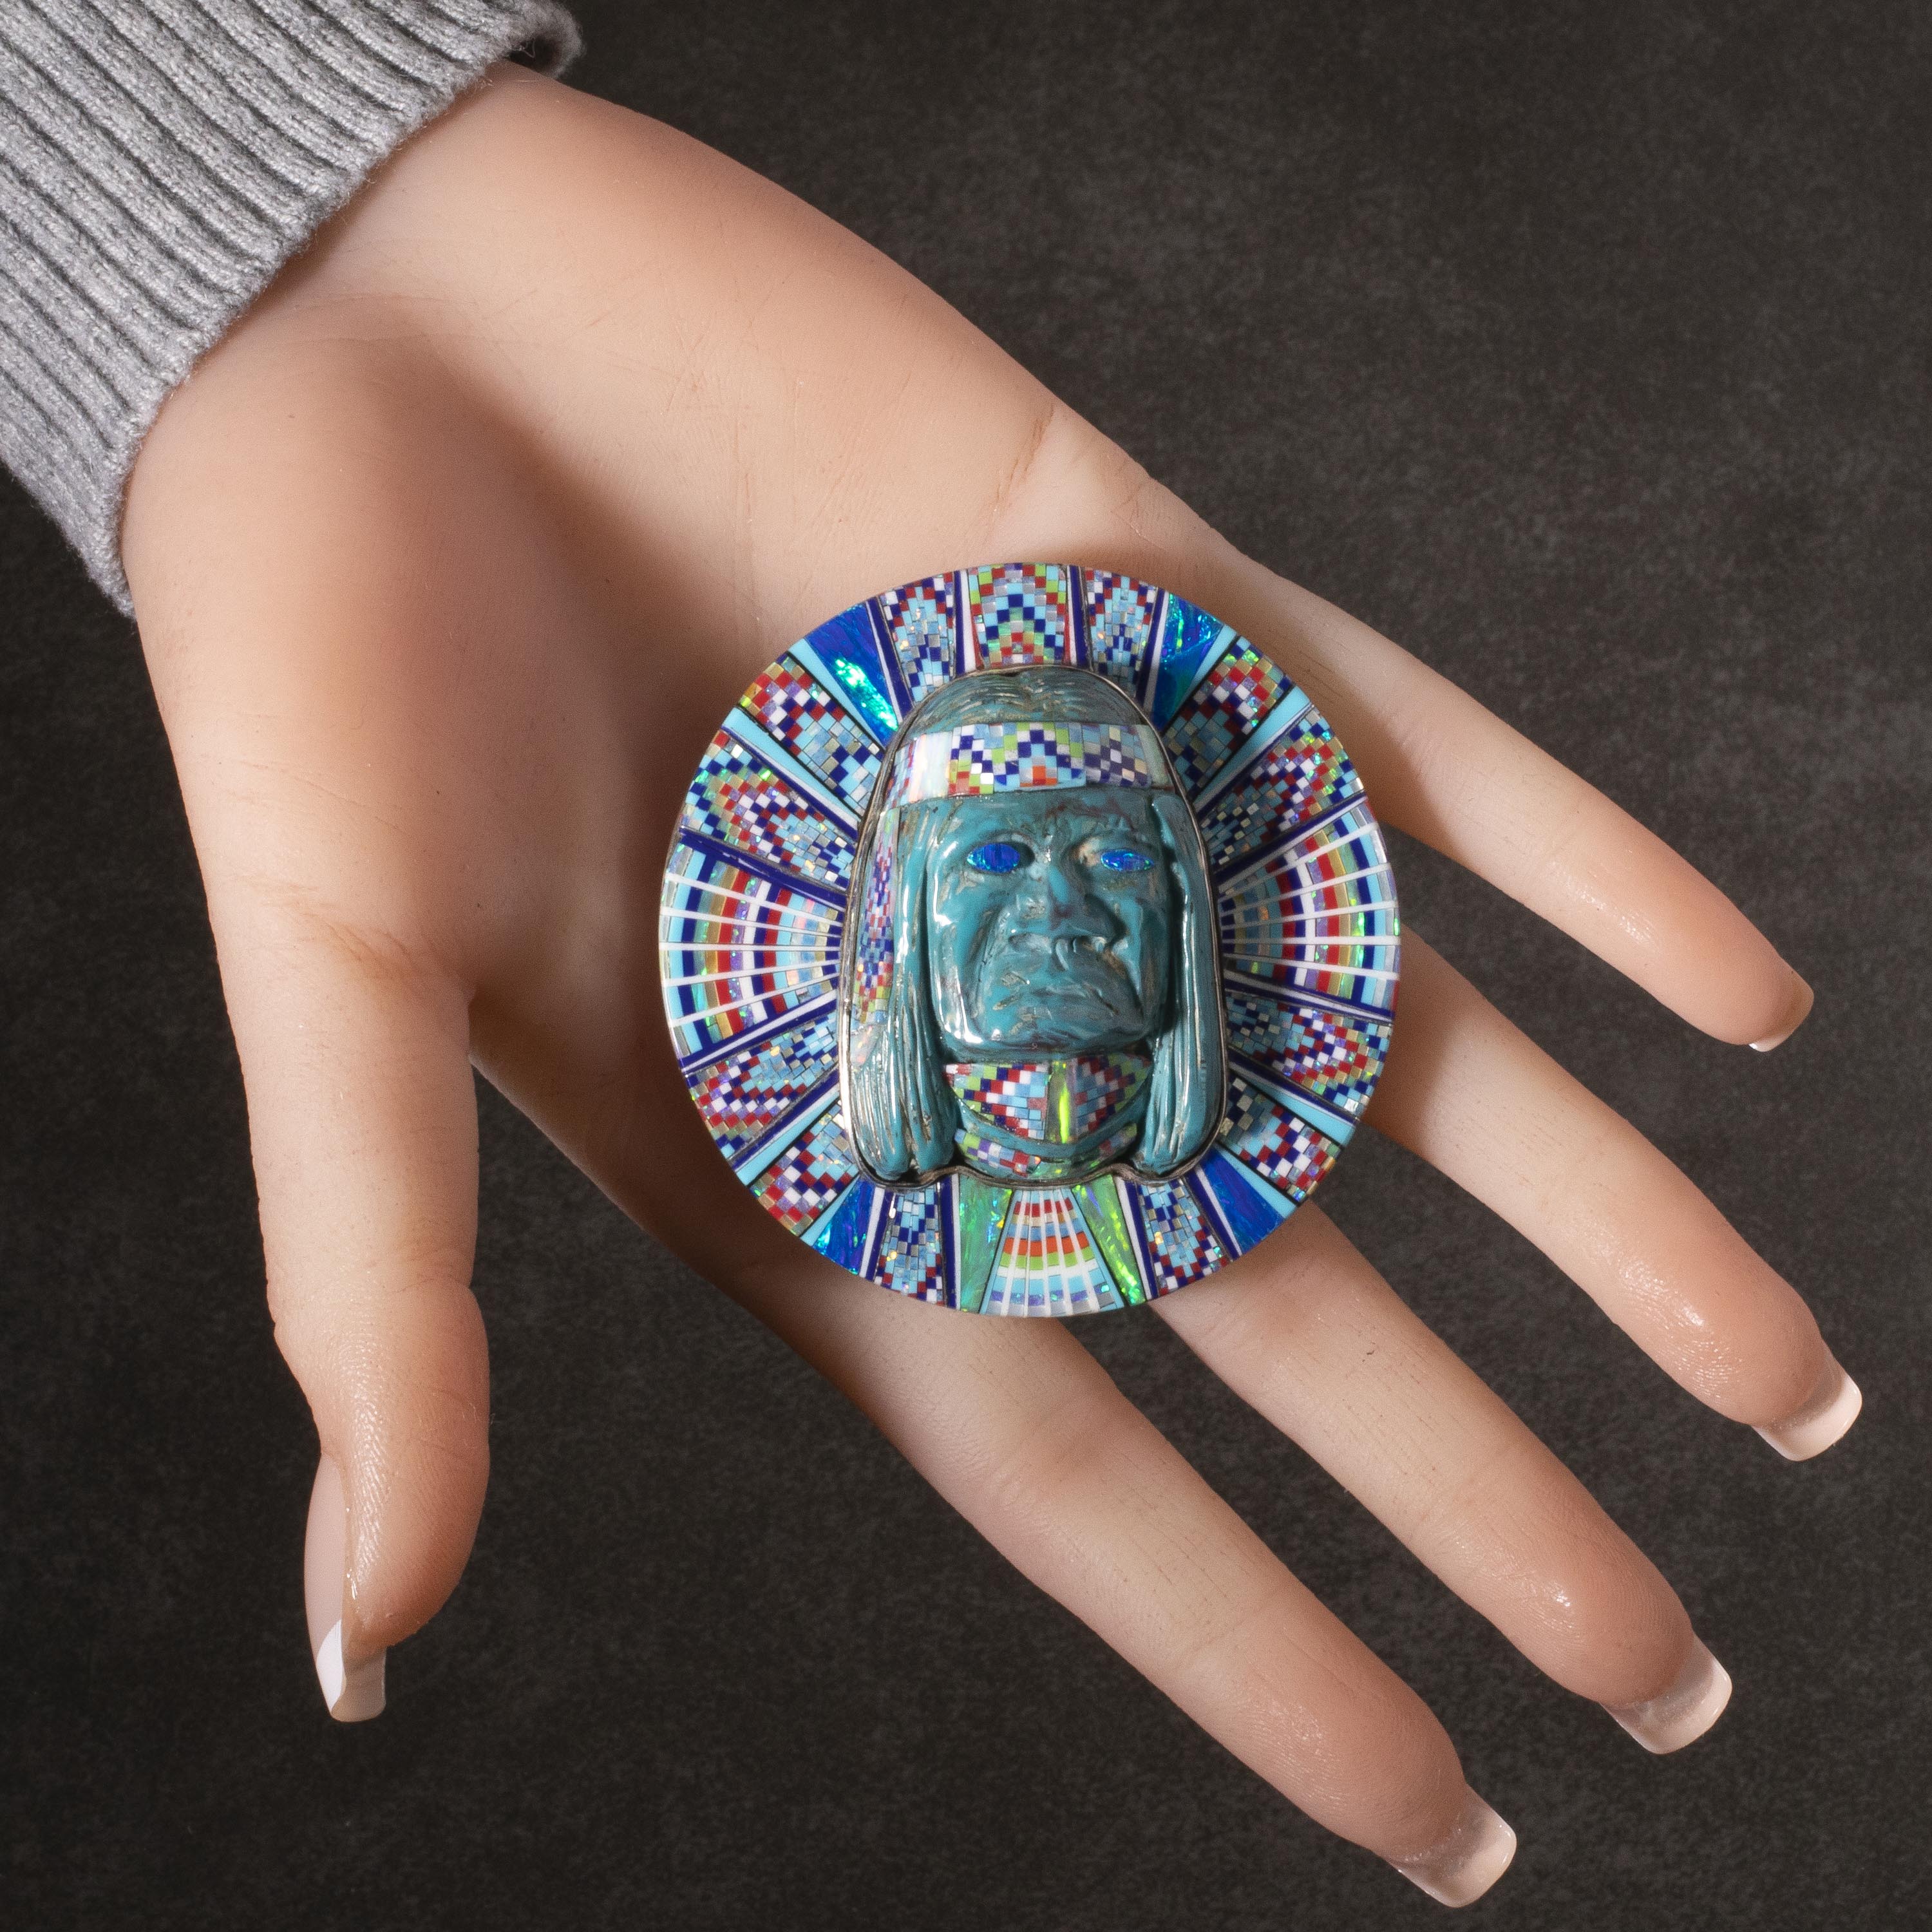 KALIFANO Southwest Silver Jewelry Multi Gem Opal Micro Inlay with Genuine Turquoise Indian Chief Handmade 925 Sterling Silver Circular Belt Buckle AKBB2400.003